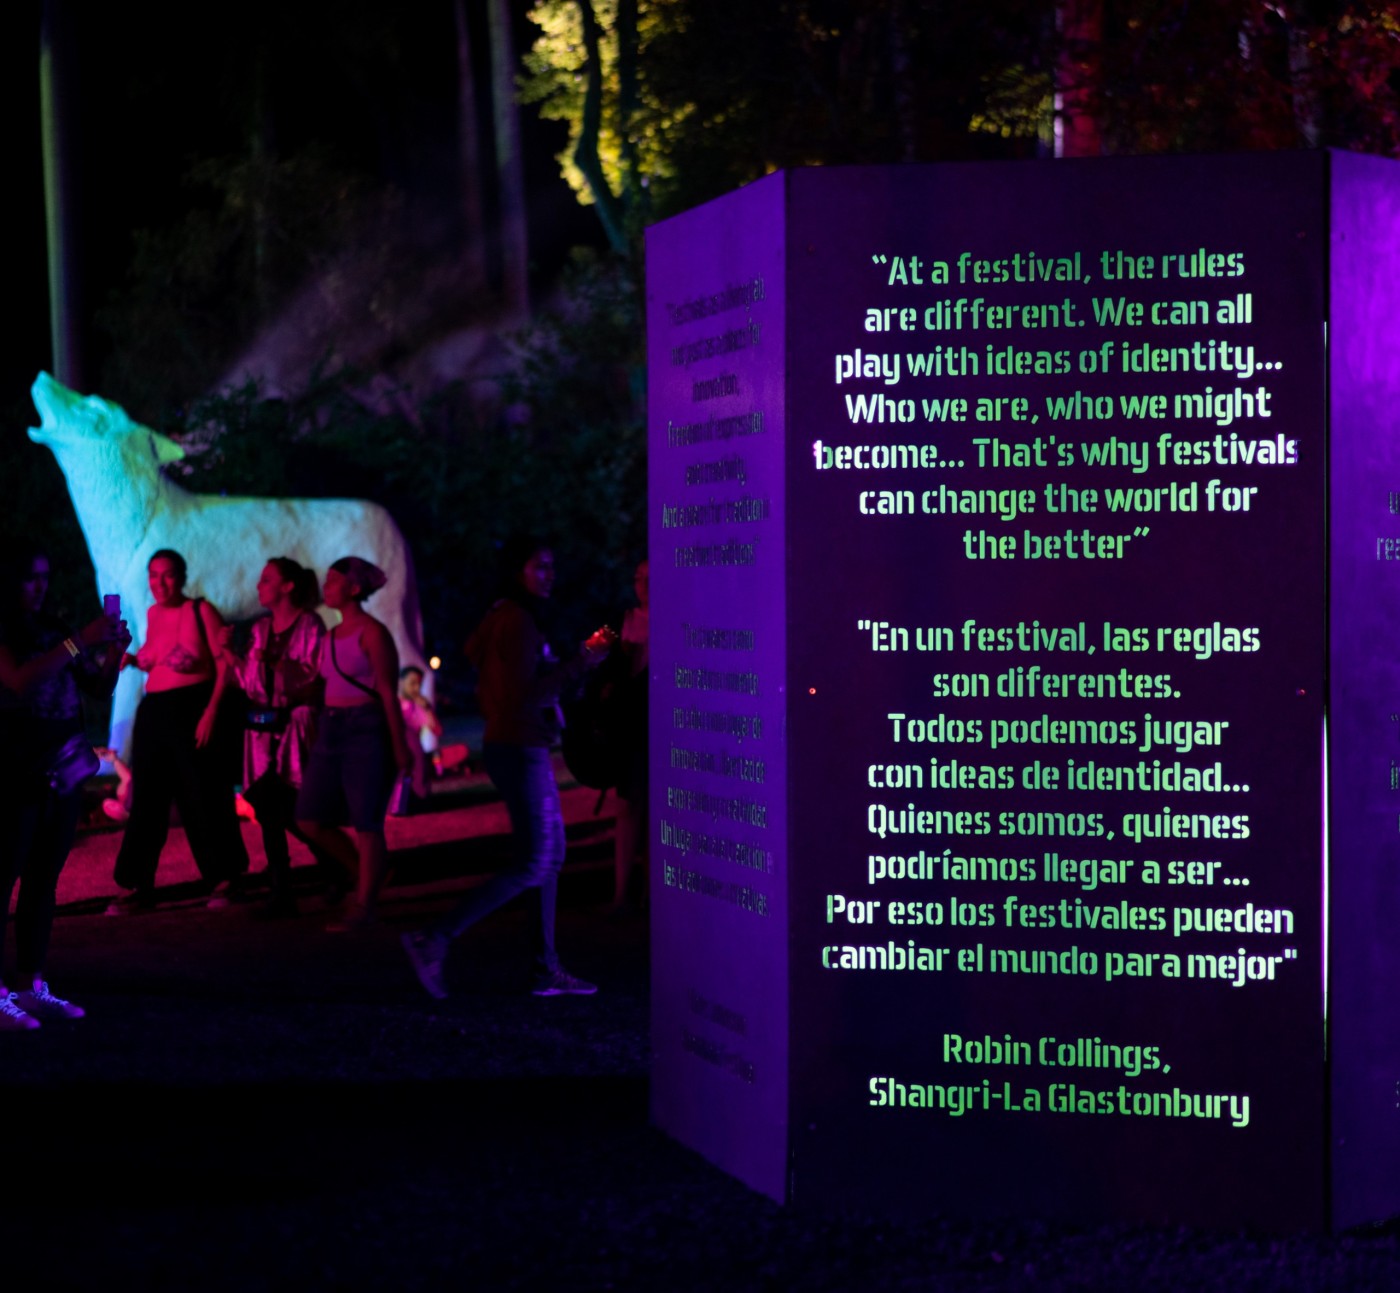 Art installation including the text "At a festival, the rules are different. We can all play with the ideas of identity... That's why festivals can change the world for better" Robin Collings, Shangri-La Glastonbury